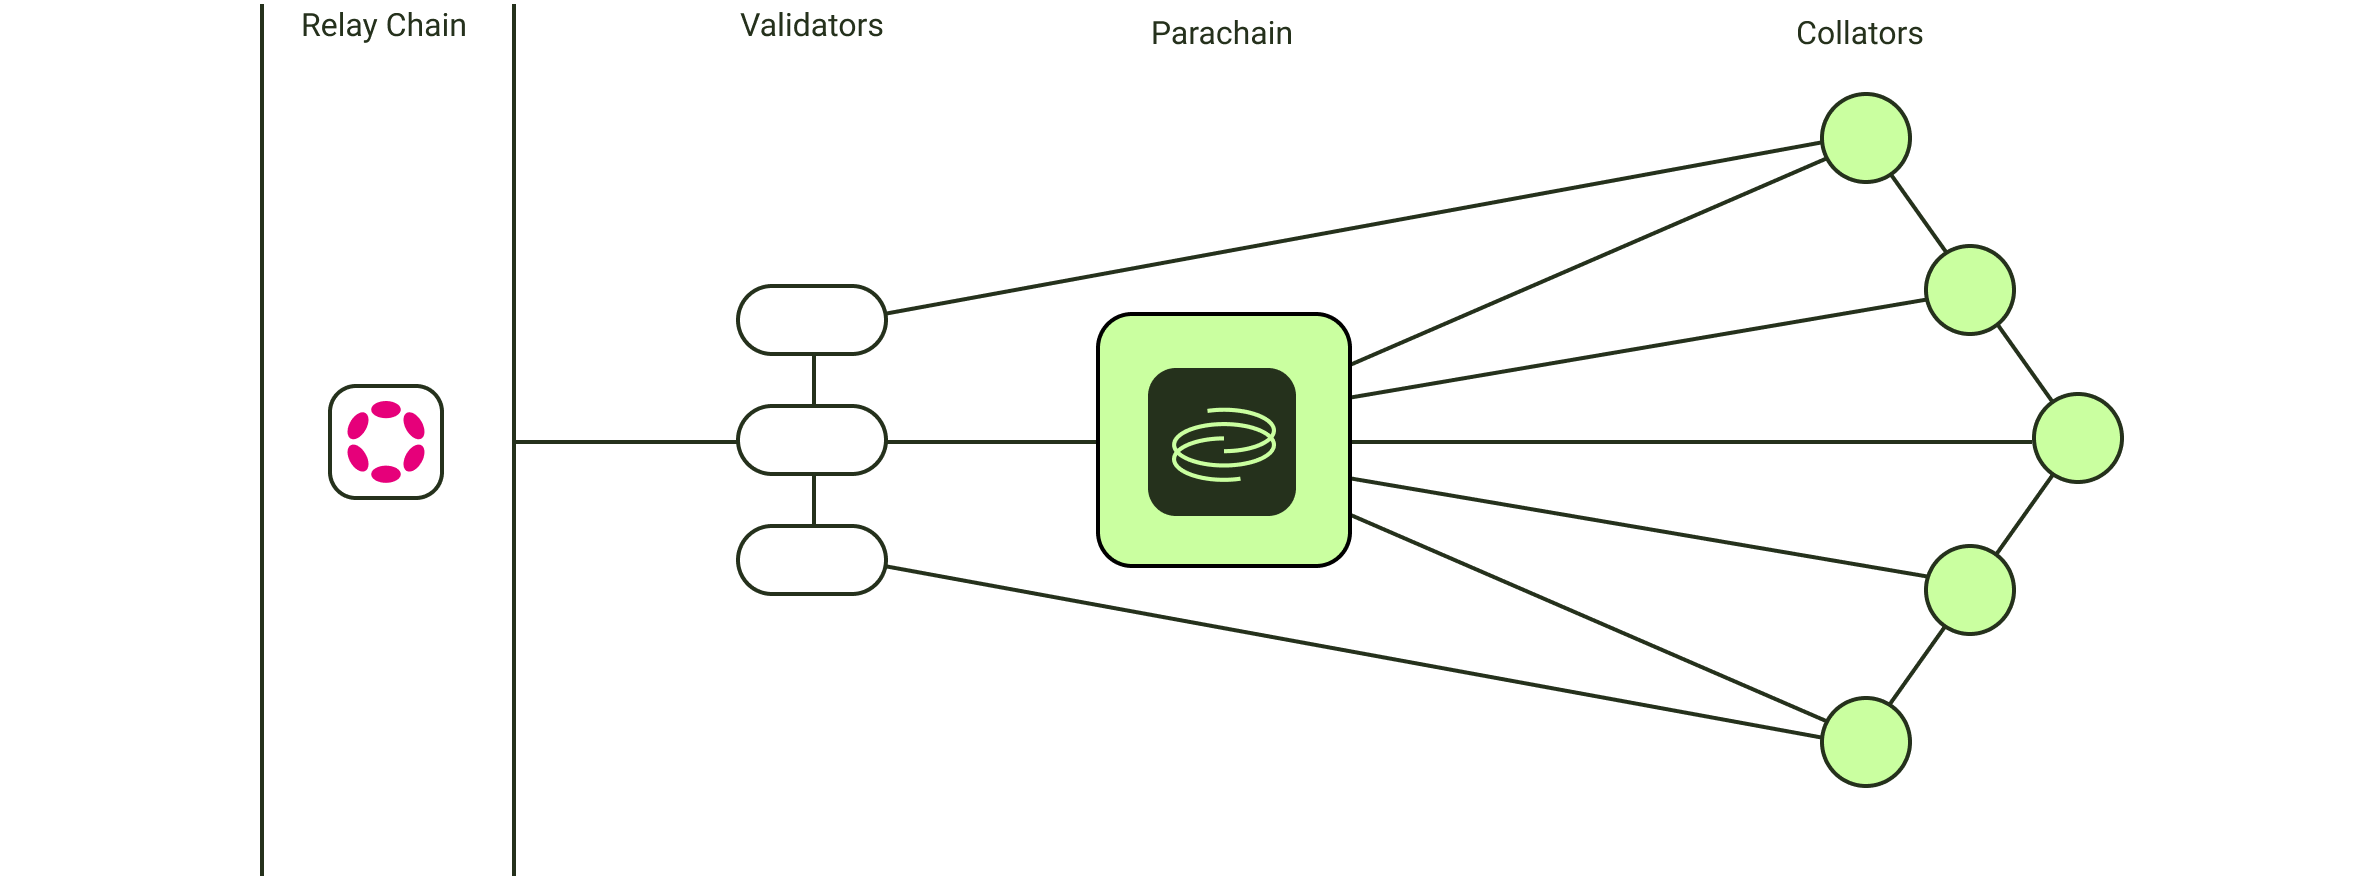 Relationship between the Polimec parachain and the Polkadot Relay Chain